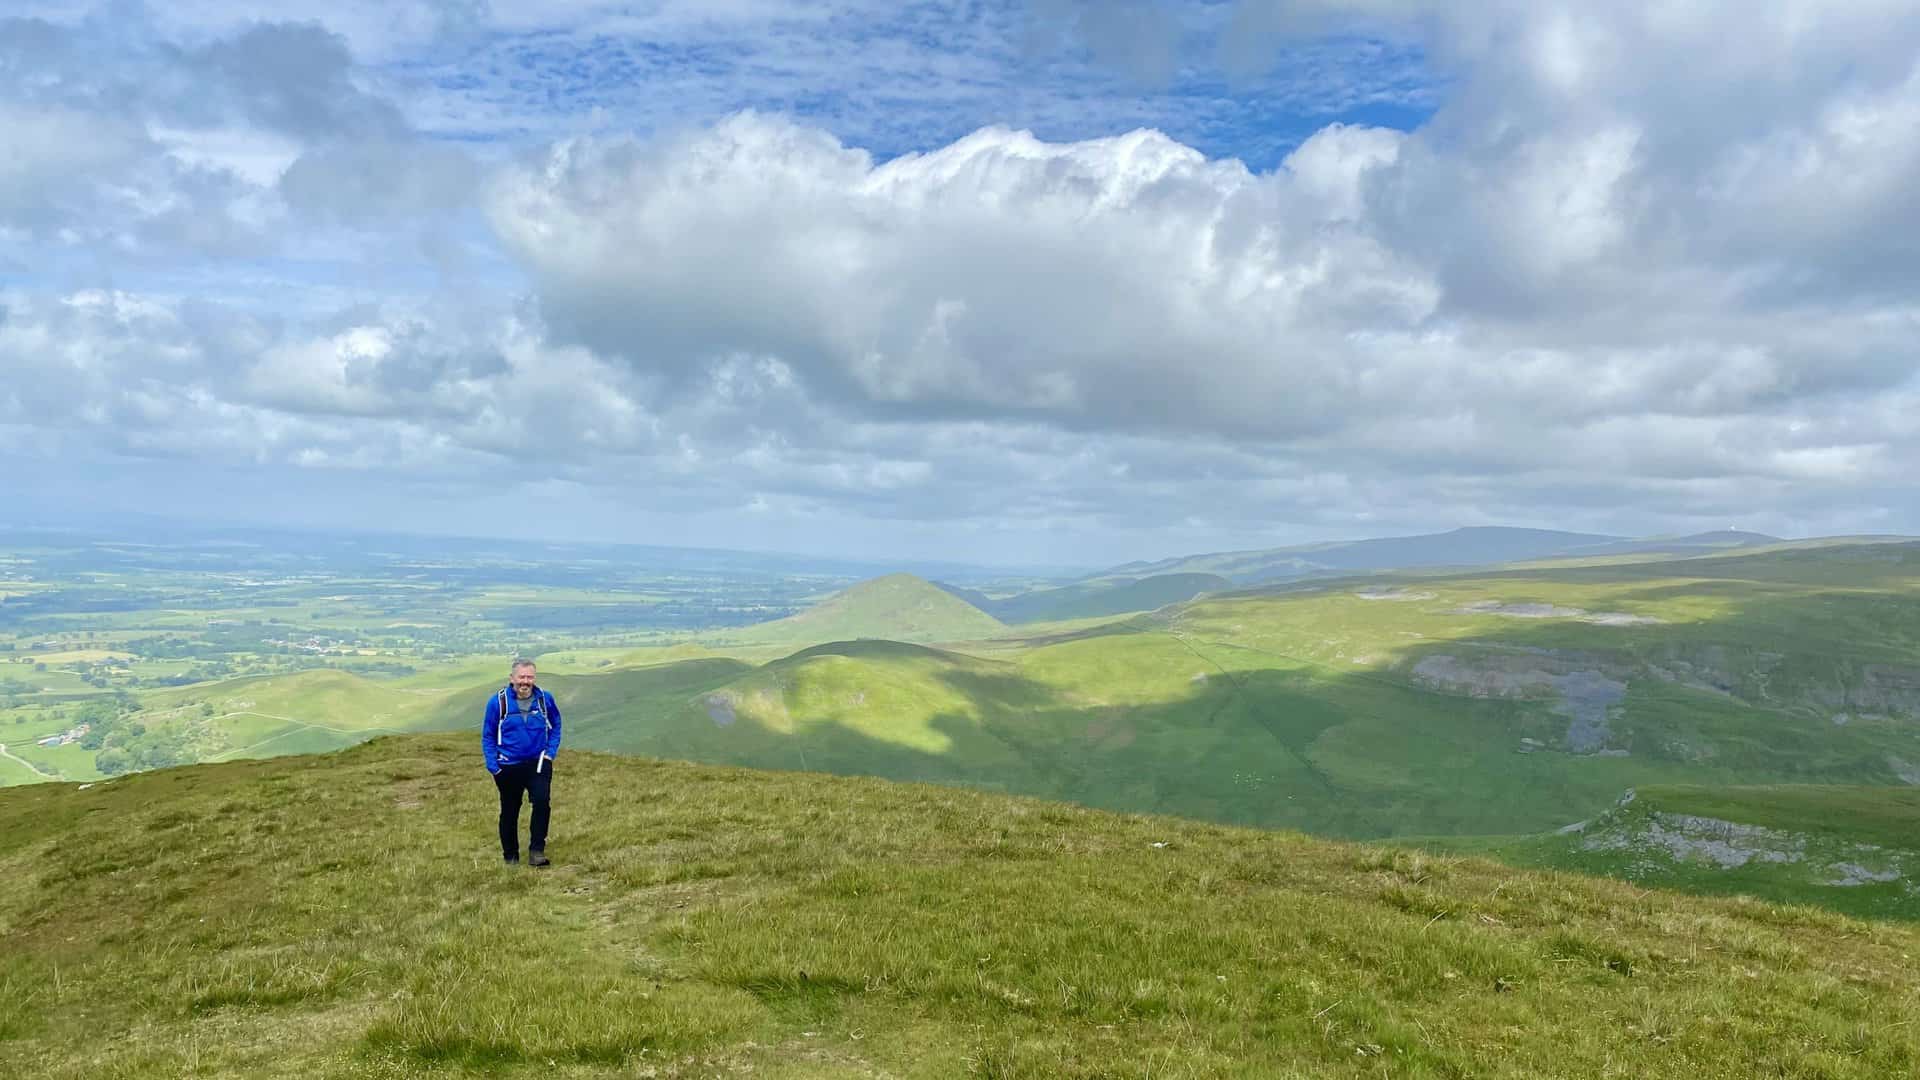 Murton Pike is cone-shaped and from its summit there are excellent 360-degree views of the surrounding landscape.